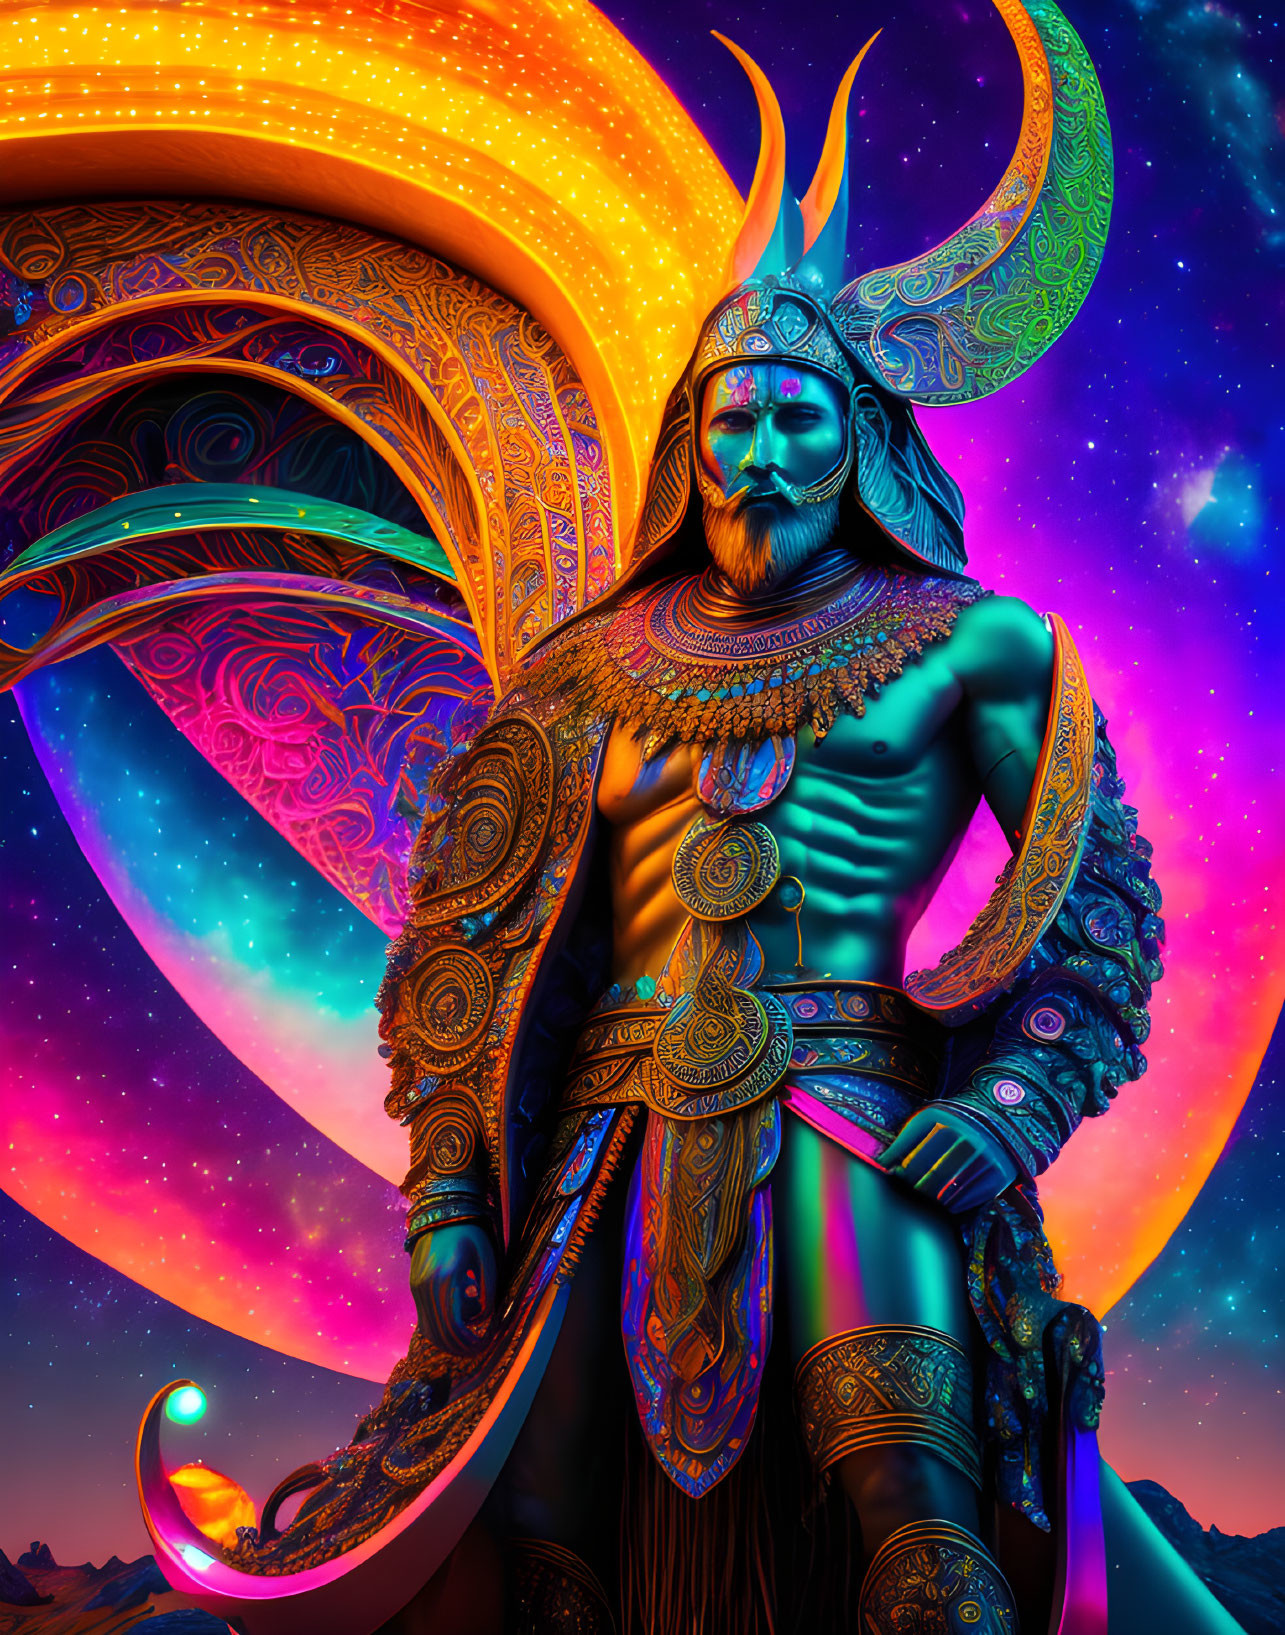 Colorful digital artwork: Mythical warrior in ornate armor against psychedelic celestial backdrop